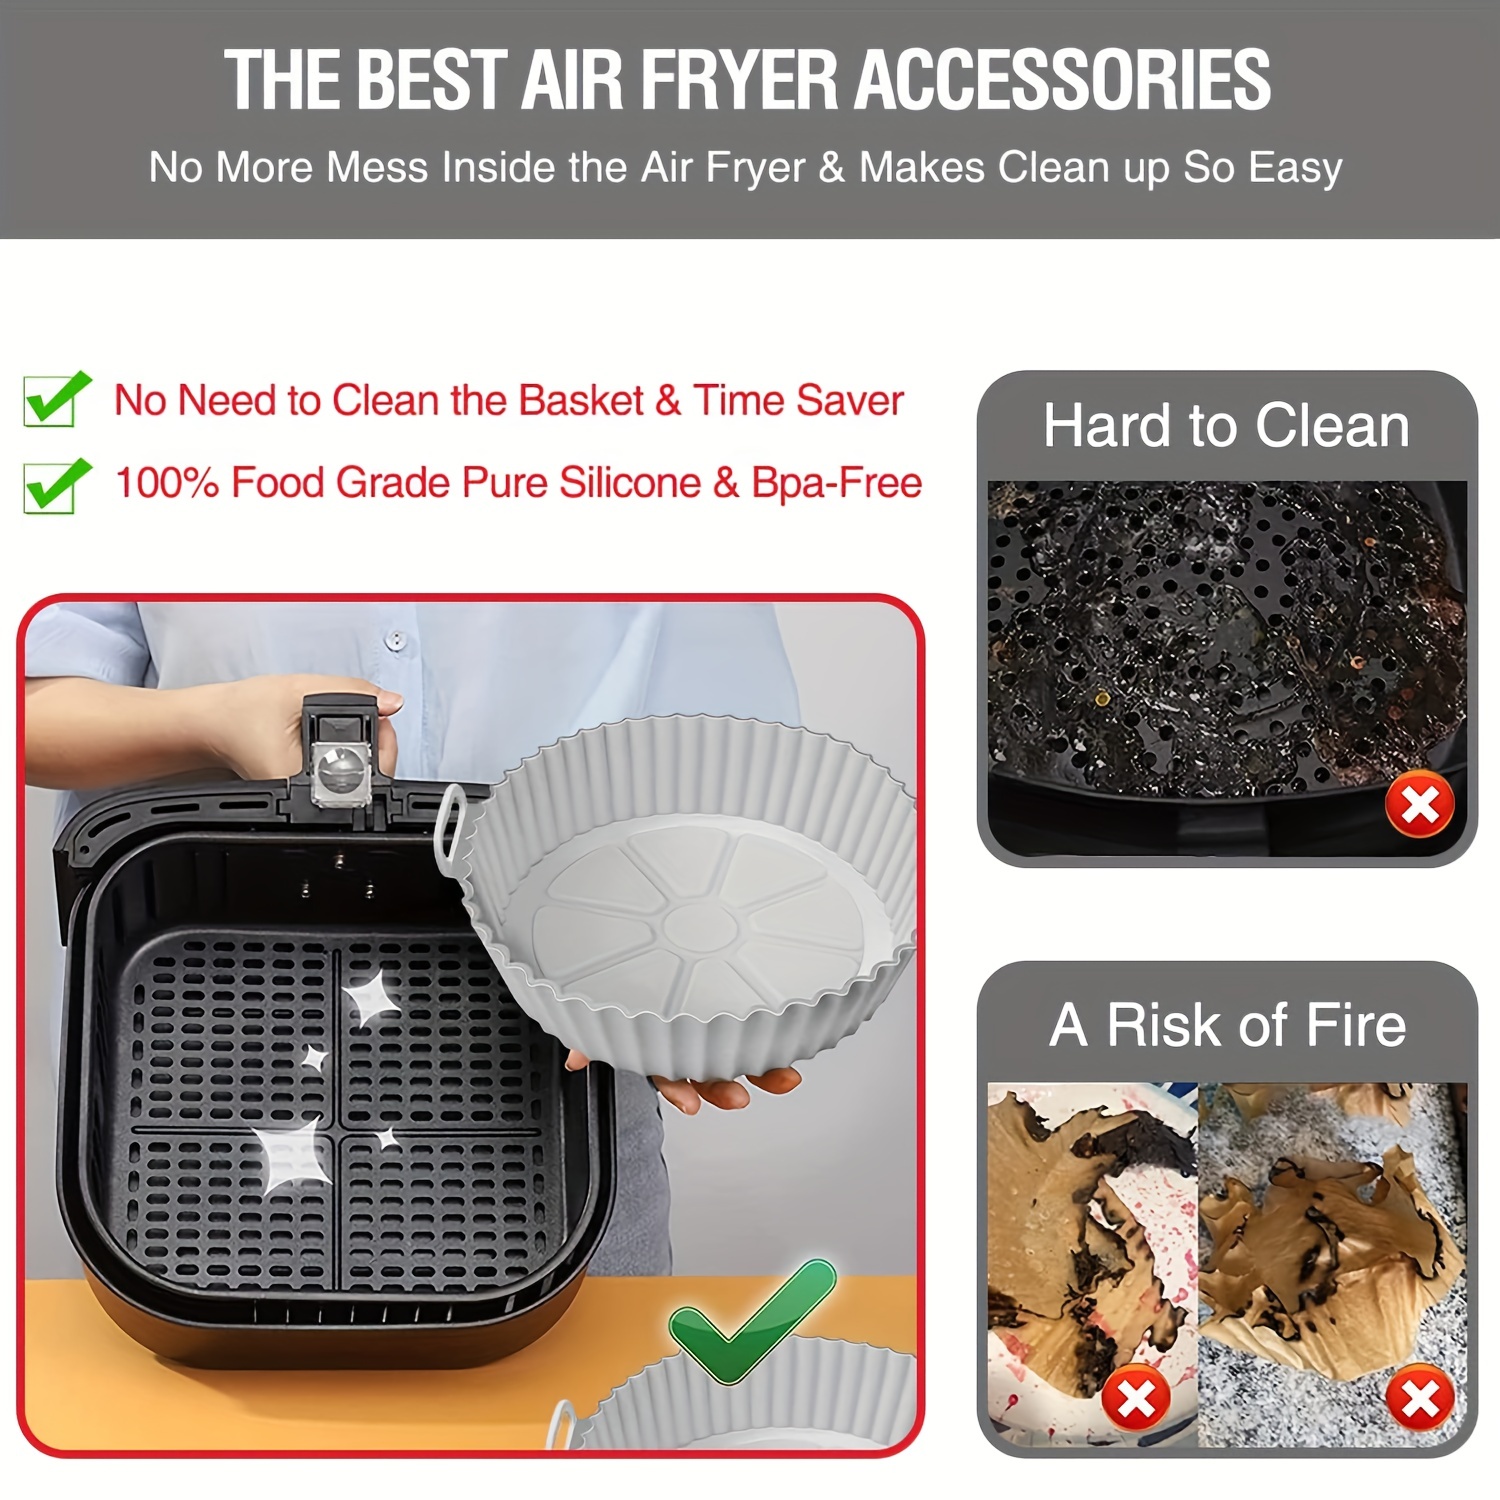 2pcs Air Fryer Silicone Liners Pot Basket Square, Easy Cleaning Air Fryer Accessory, Replace of Parchment Paper Liner, Food Safe Reusable Air Fryer